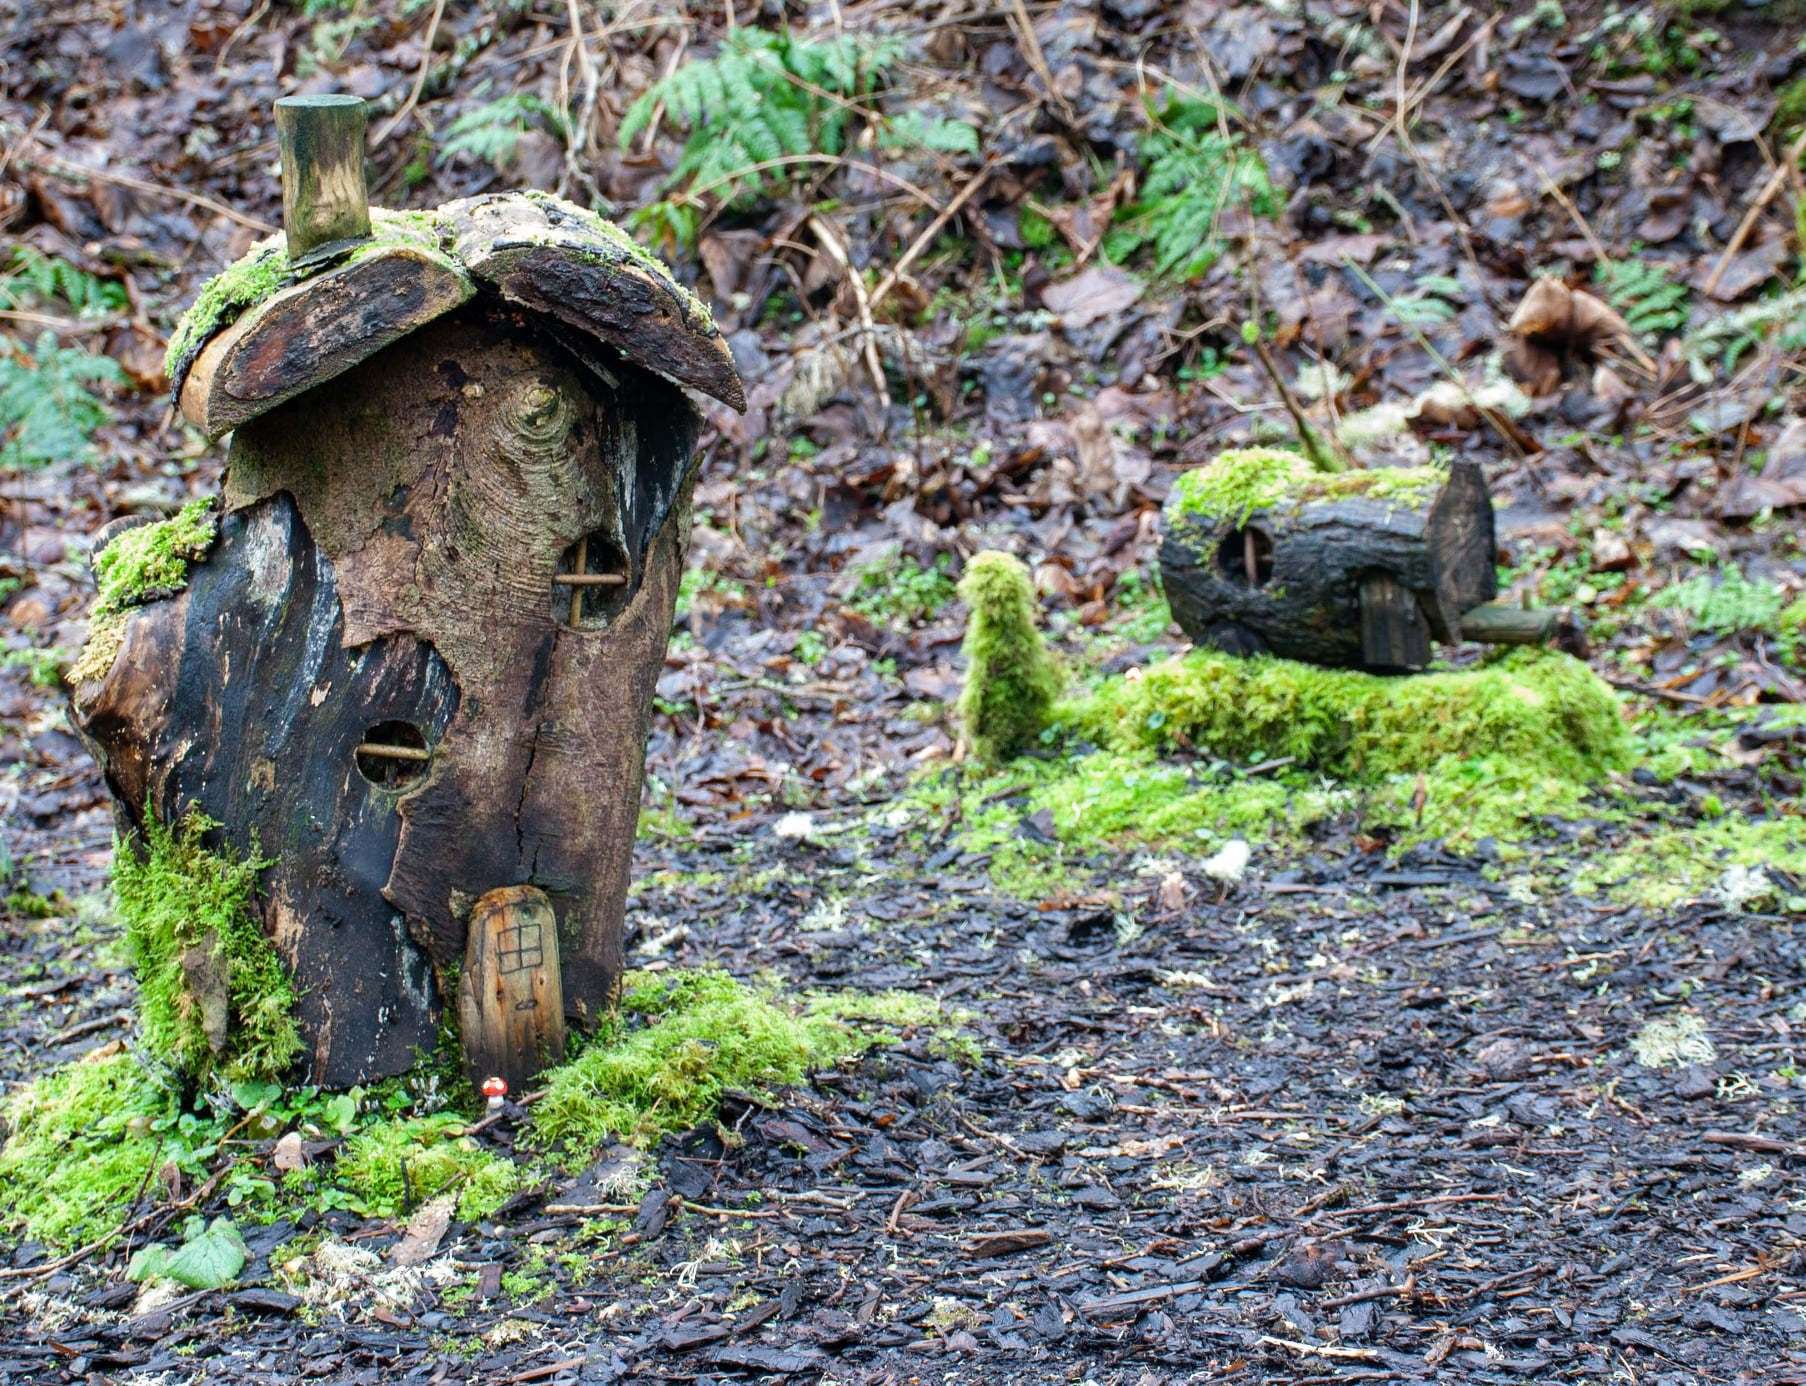 Image by Jean Mackay of The Fairy Houses at Latheron.